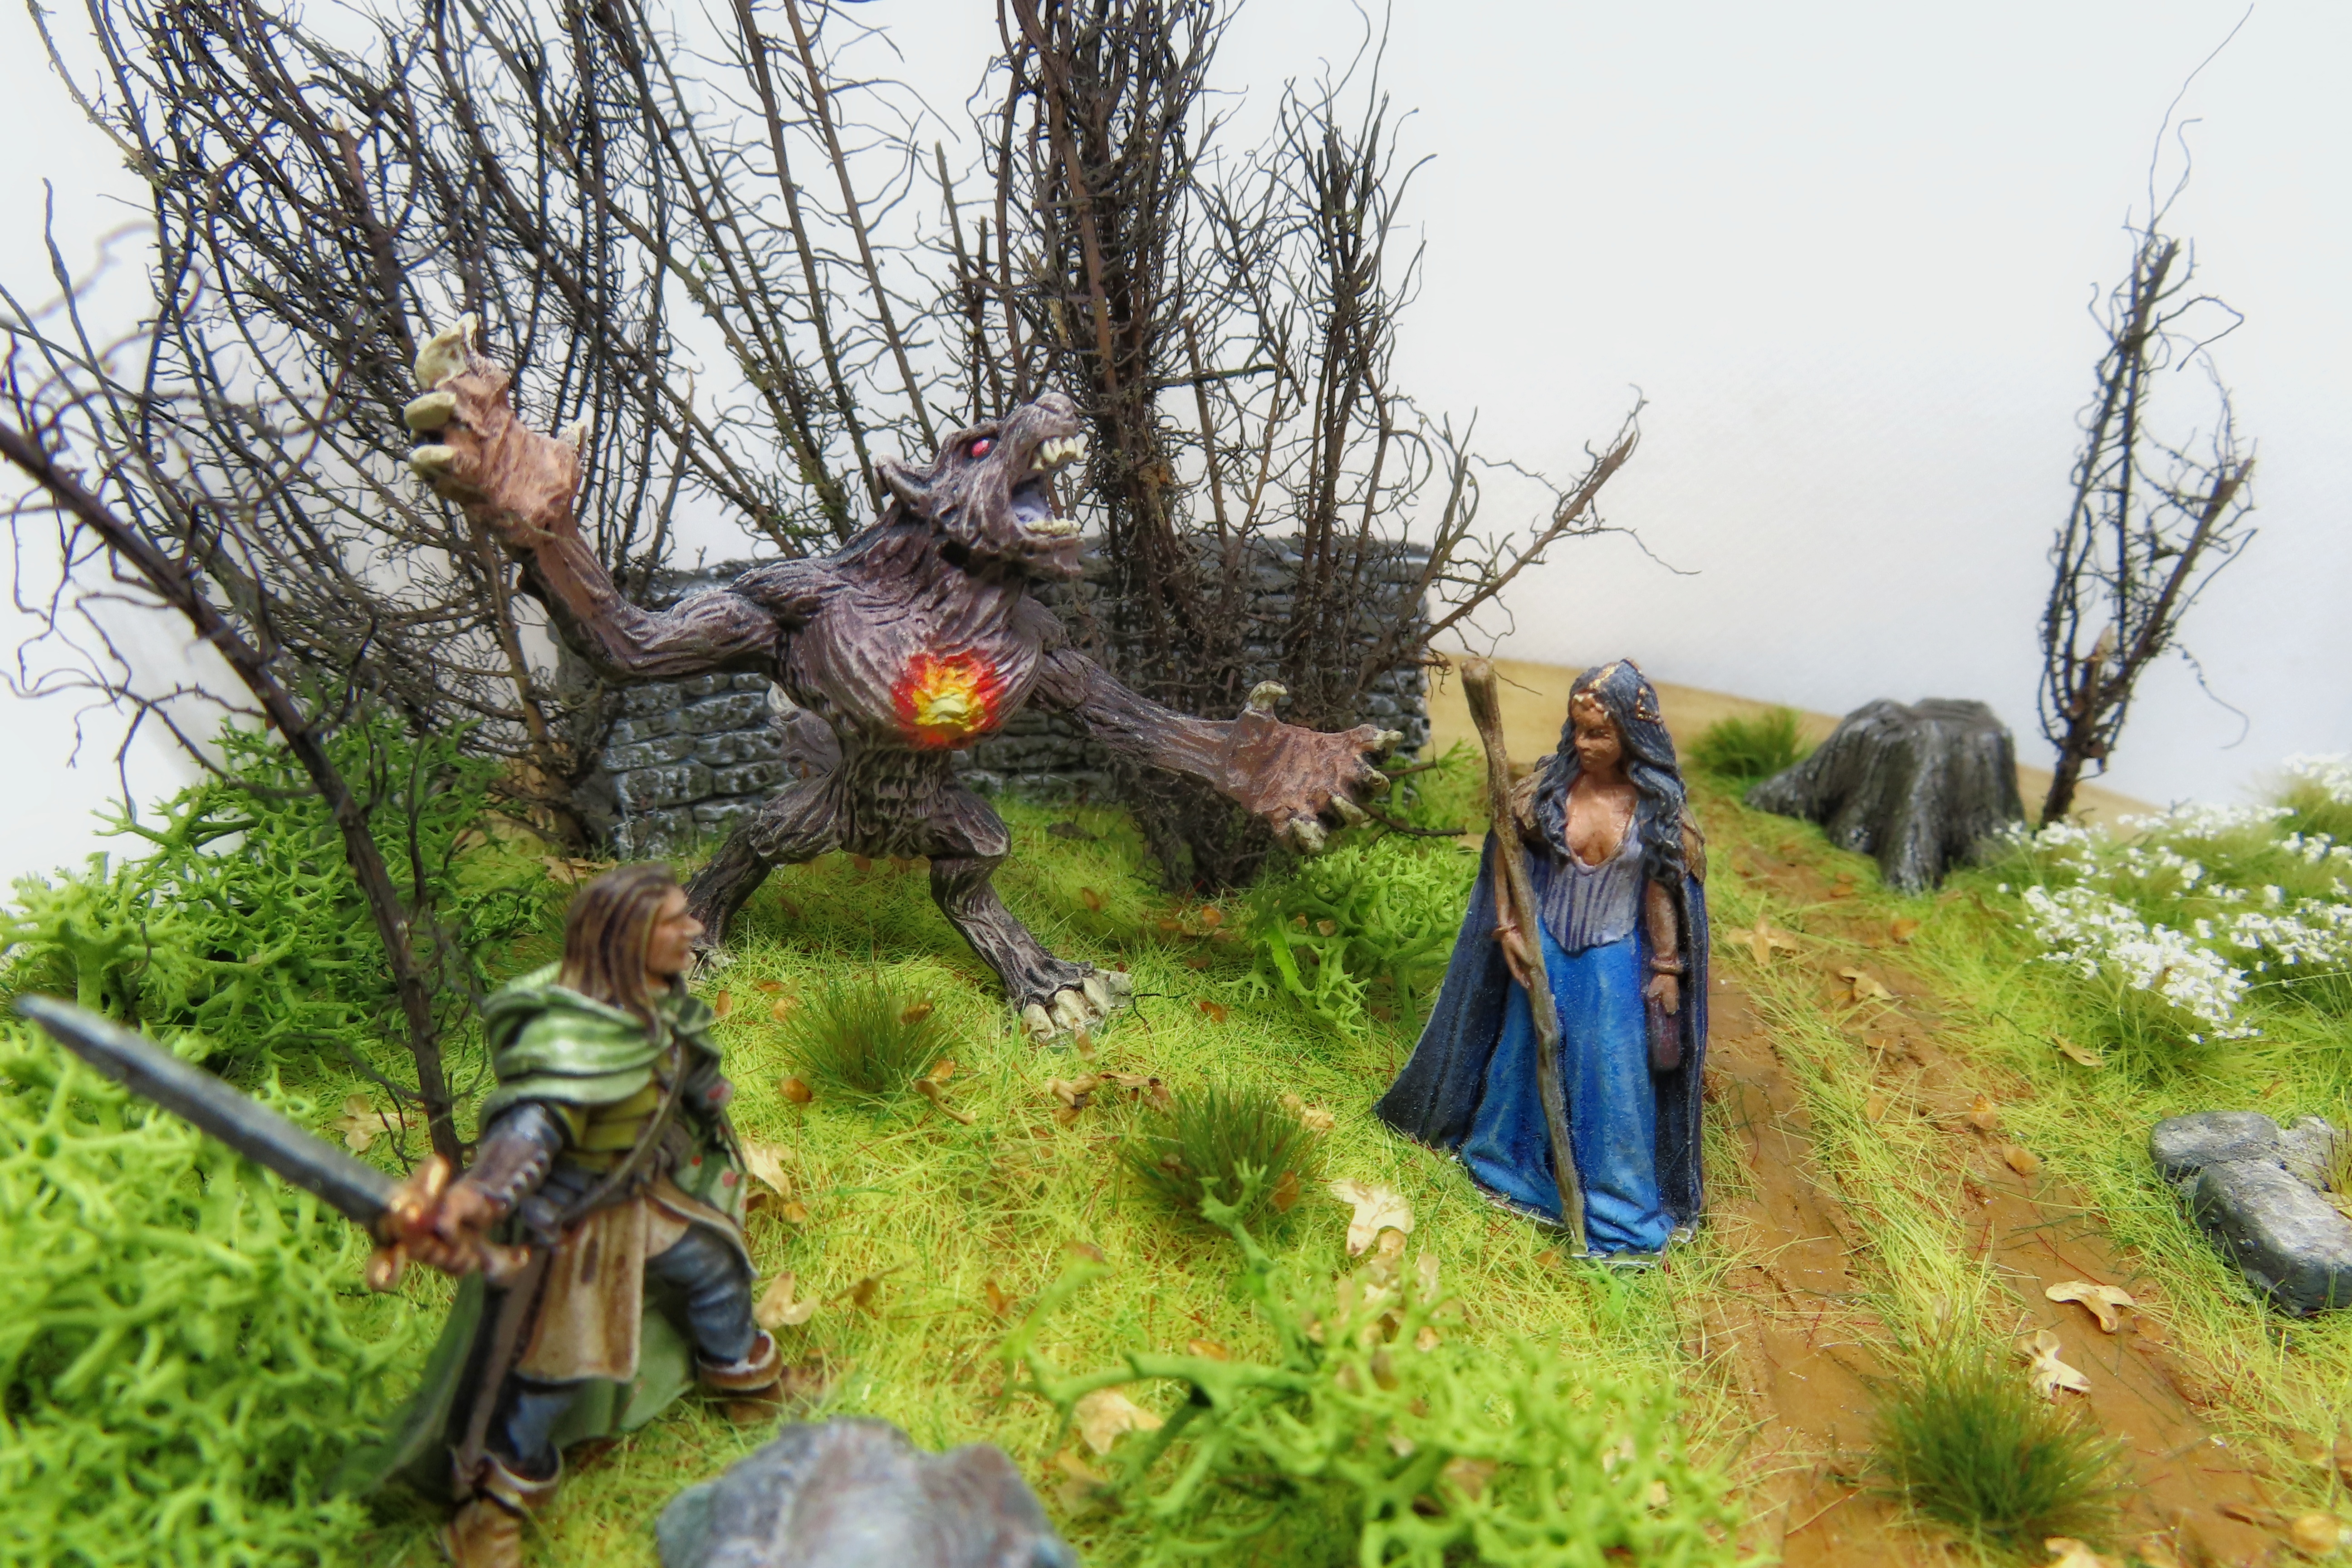 Beren & Luthien Diorama #2 by thedace